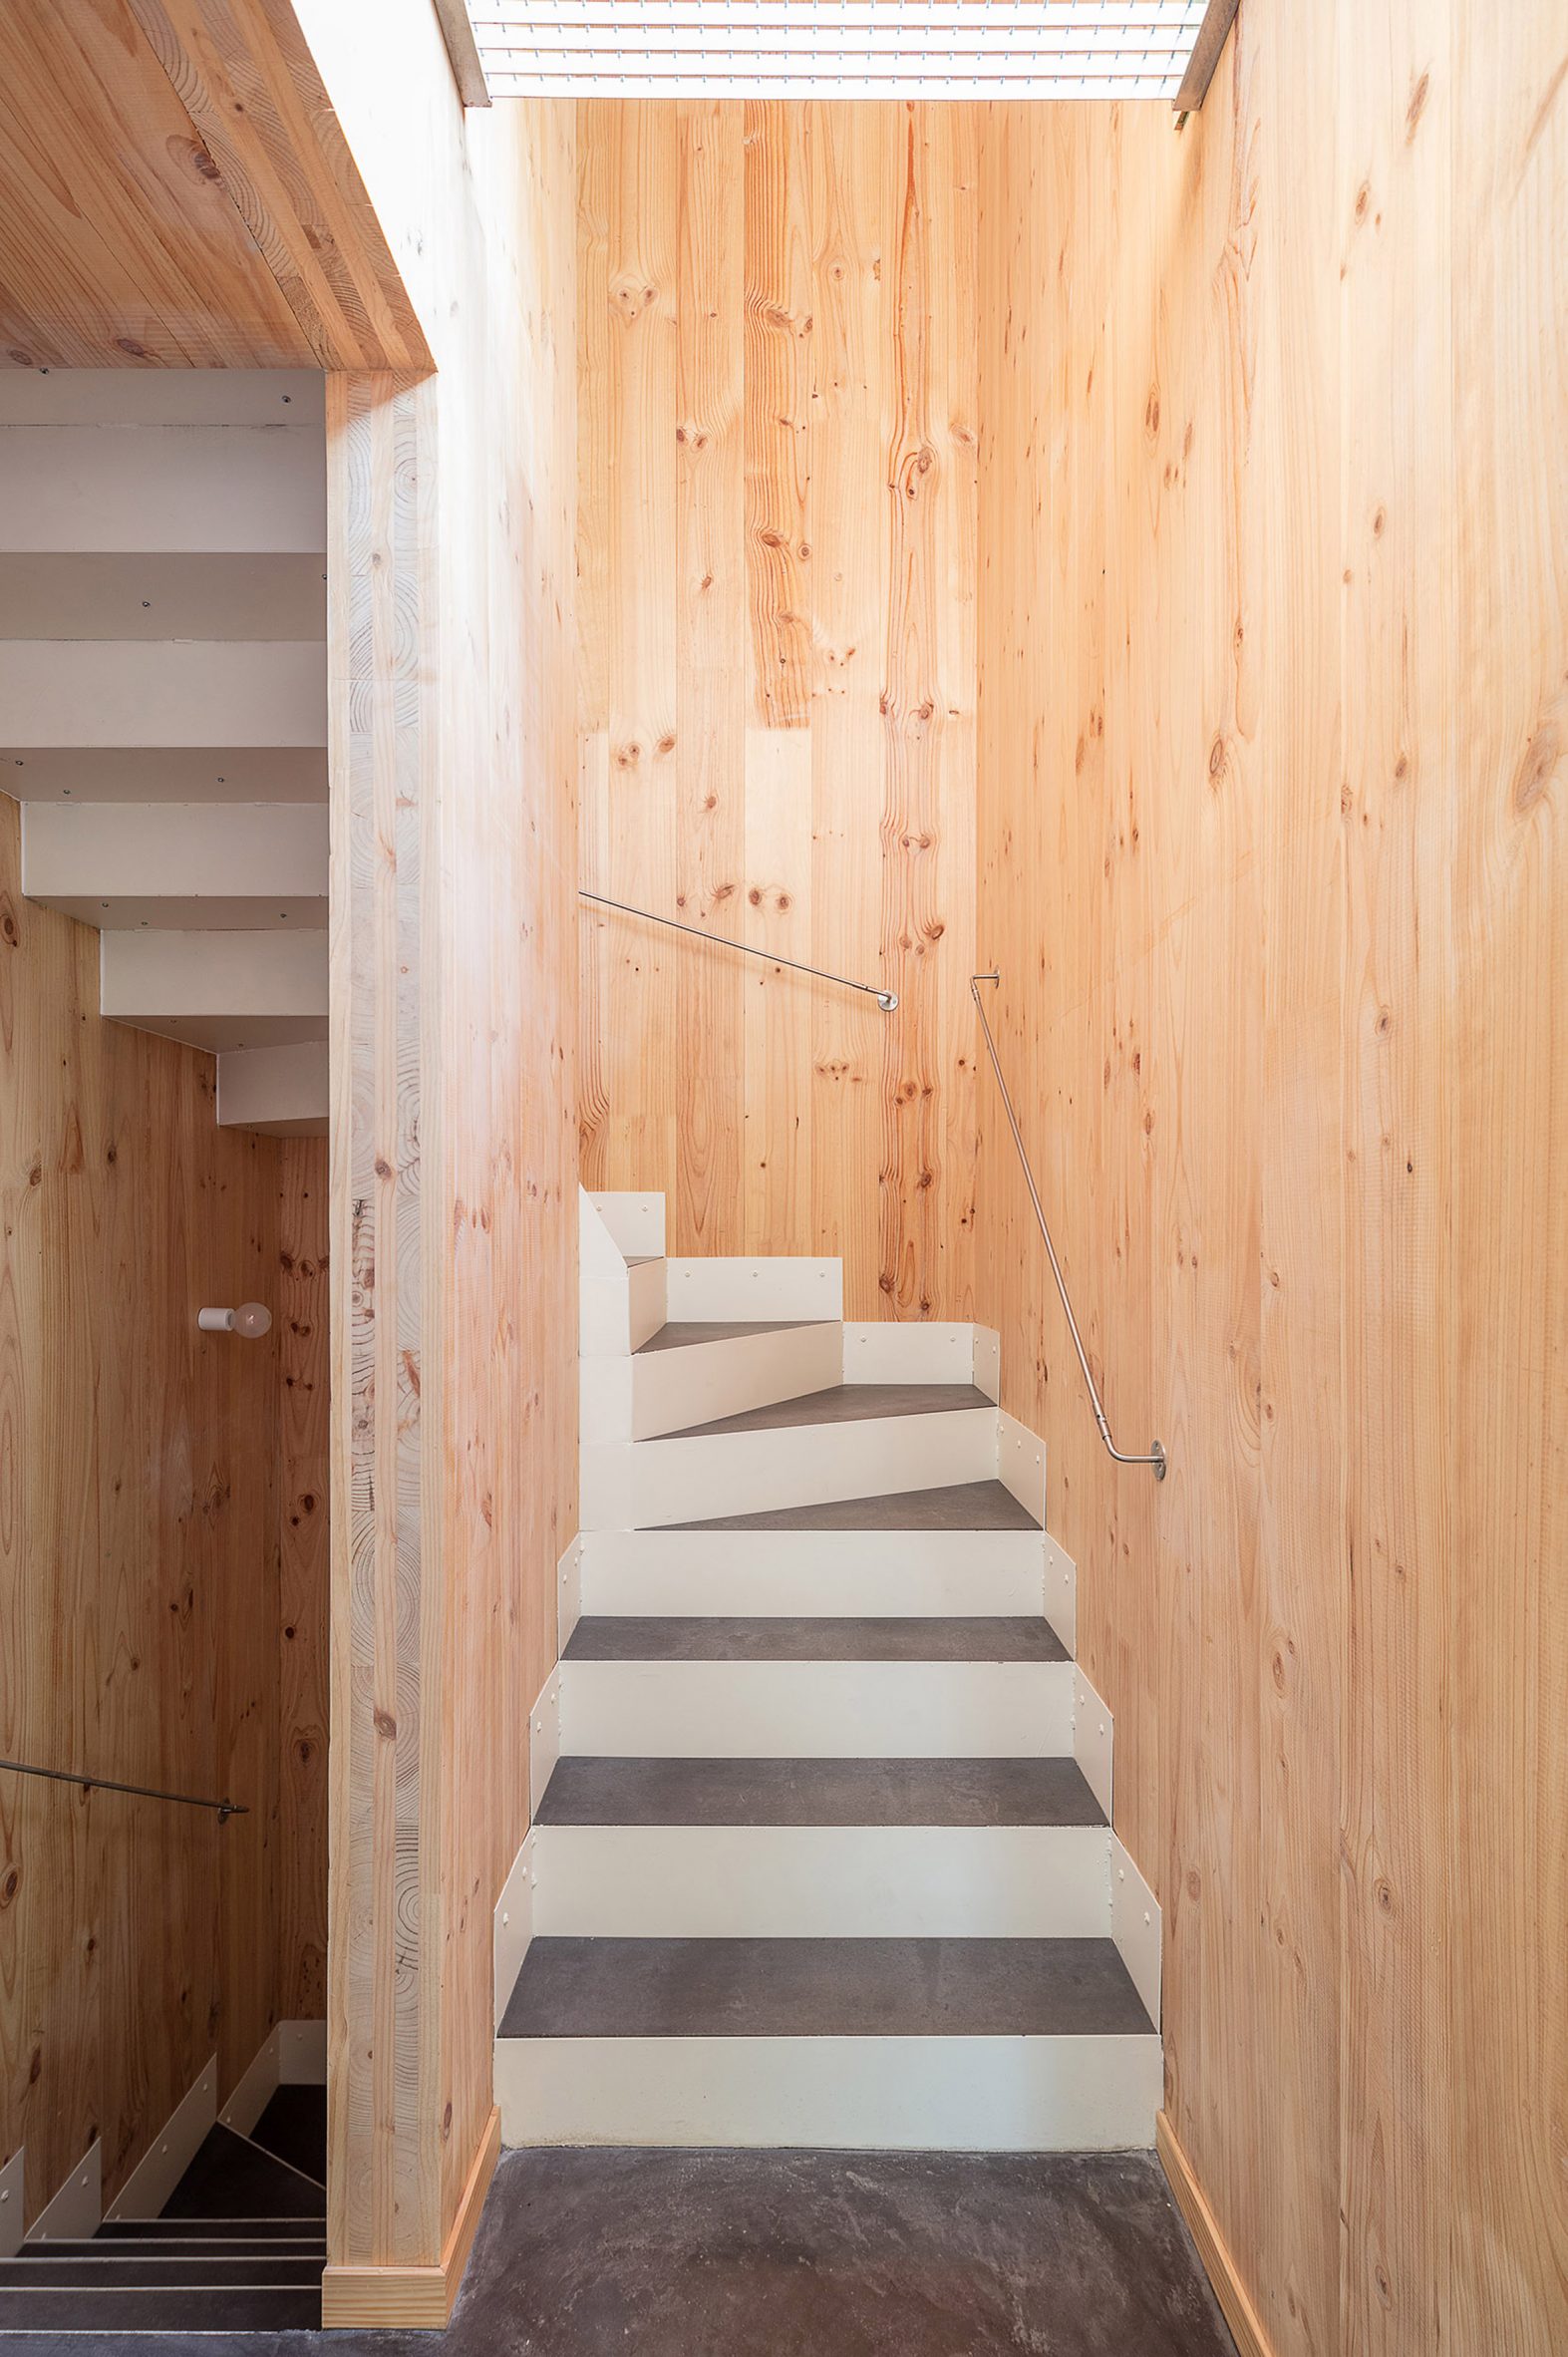 Staircase in Spanish housing block by Núñez Ribot